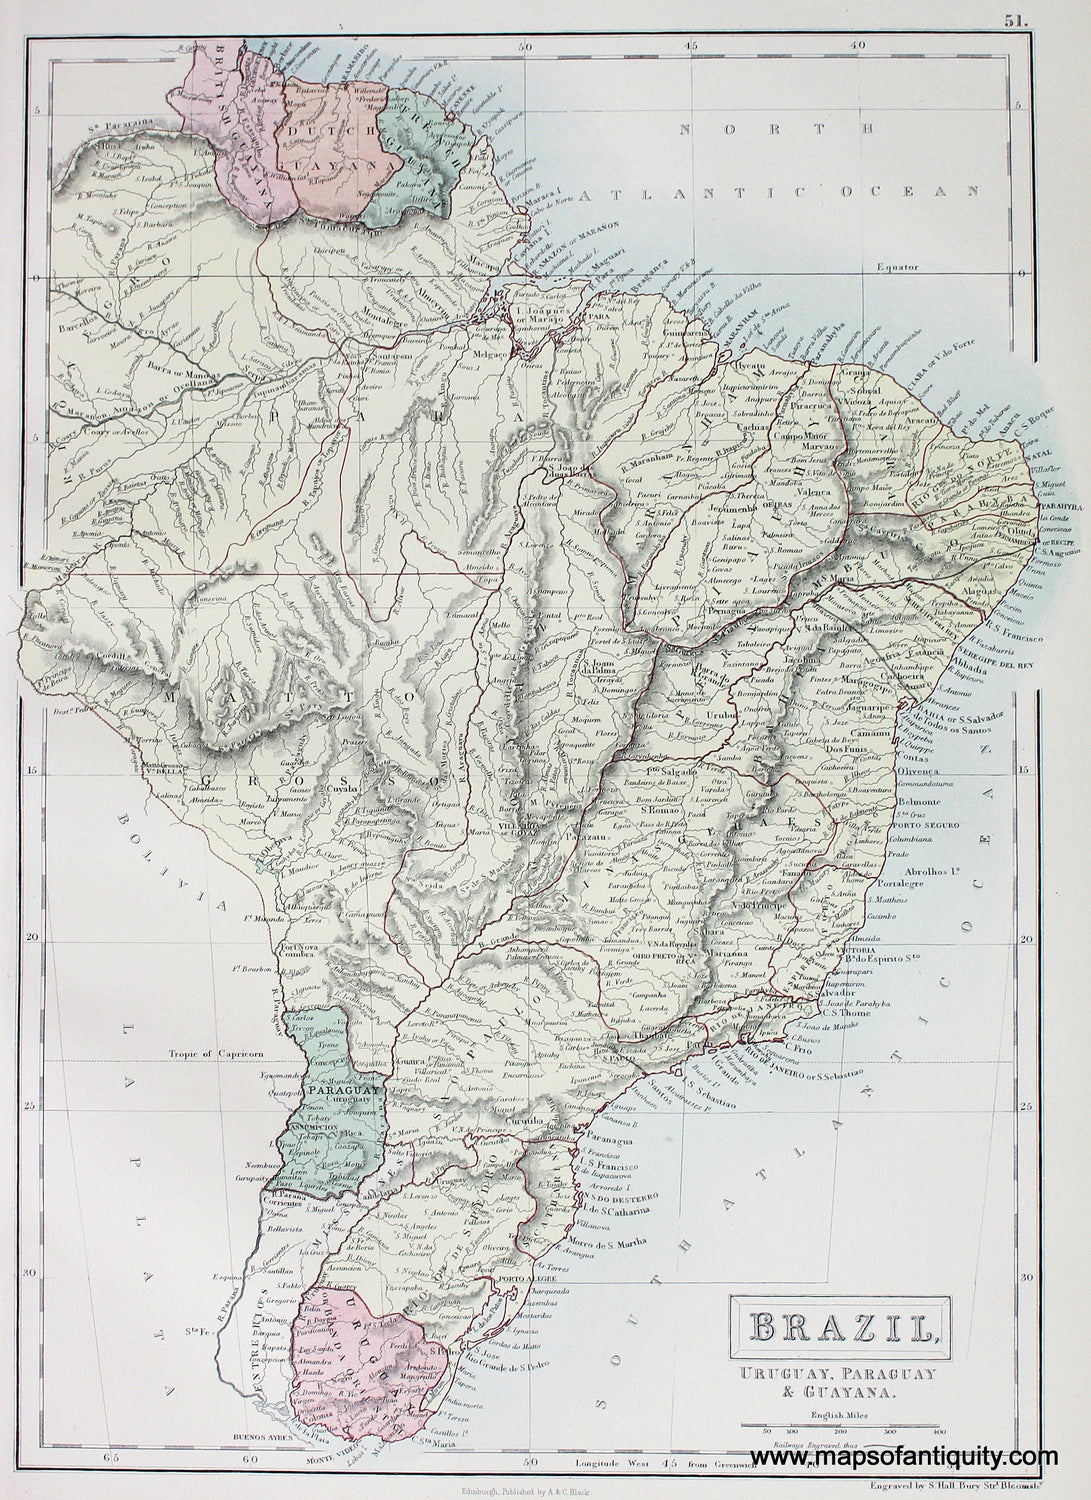 Antique-printed-color-Map-Brazil-Uruguay-Paraguay-&-Guayana-South-America-Brazil-1879-Black-Maps-Of-Antiquity